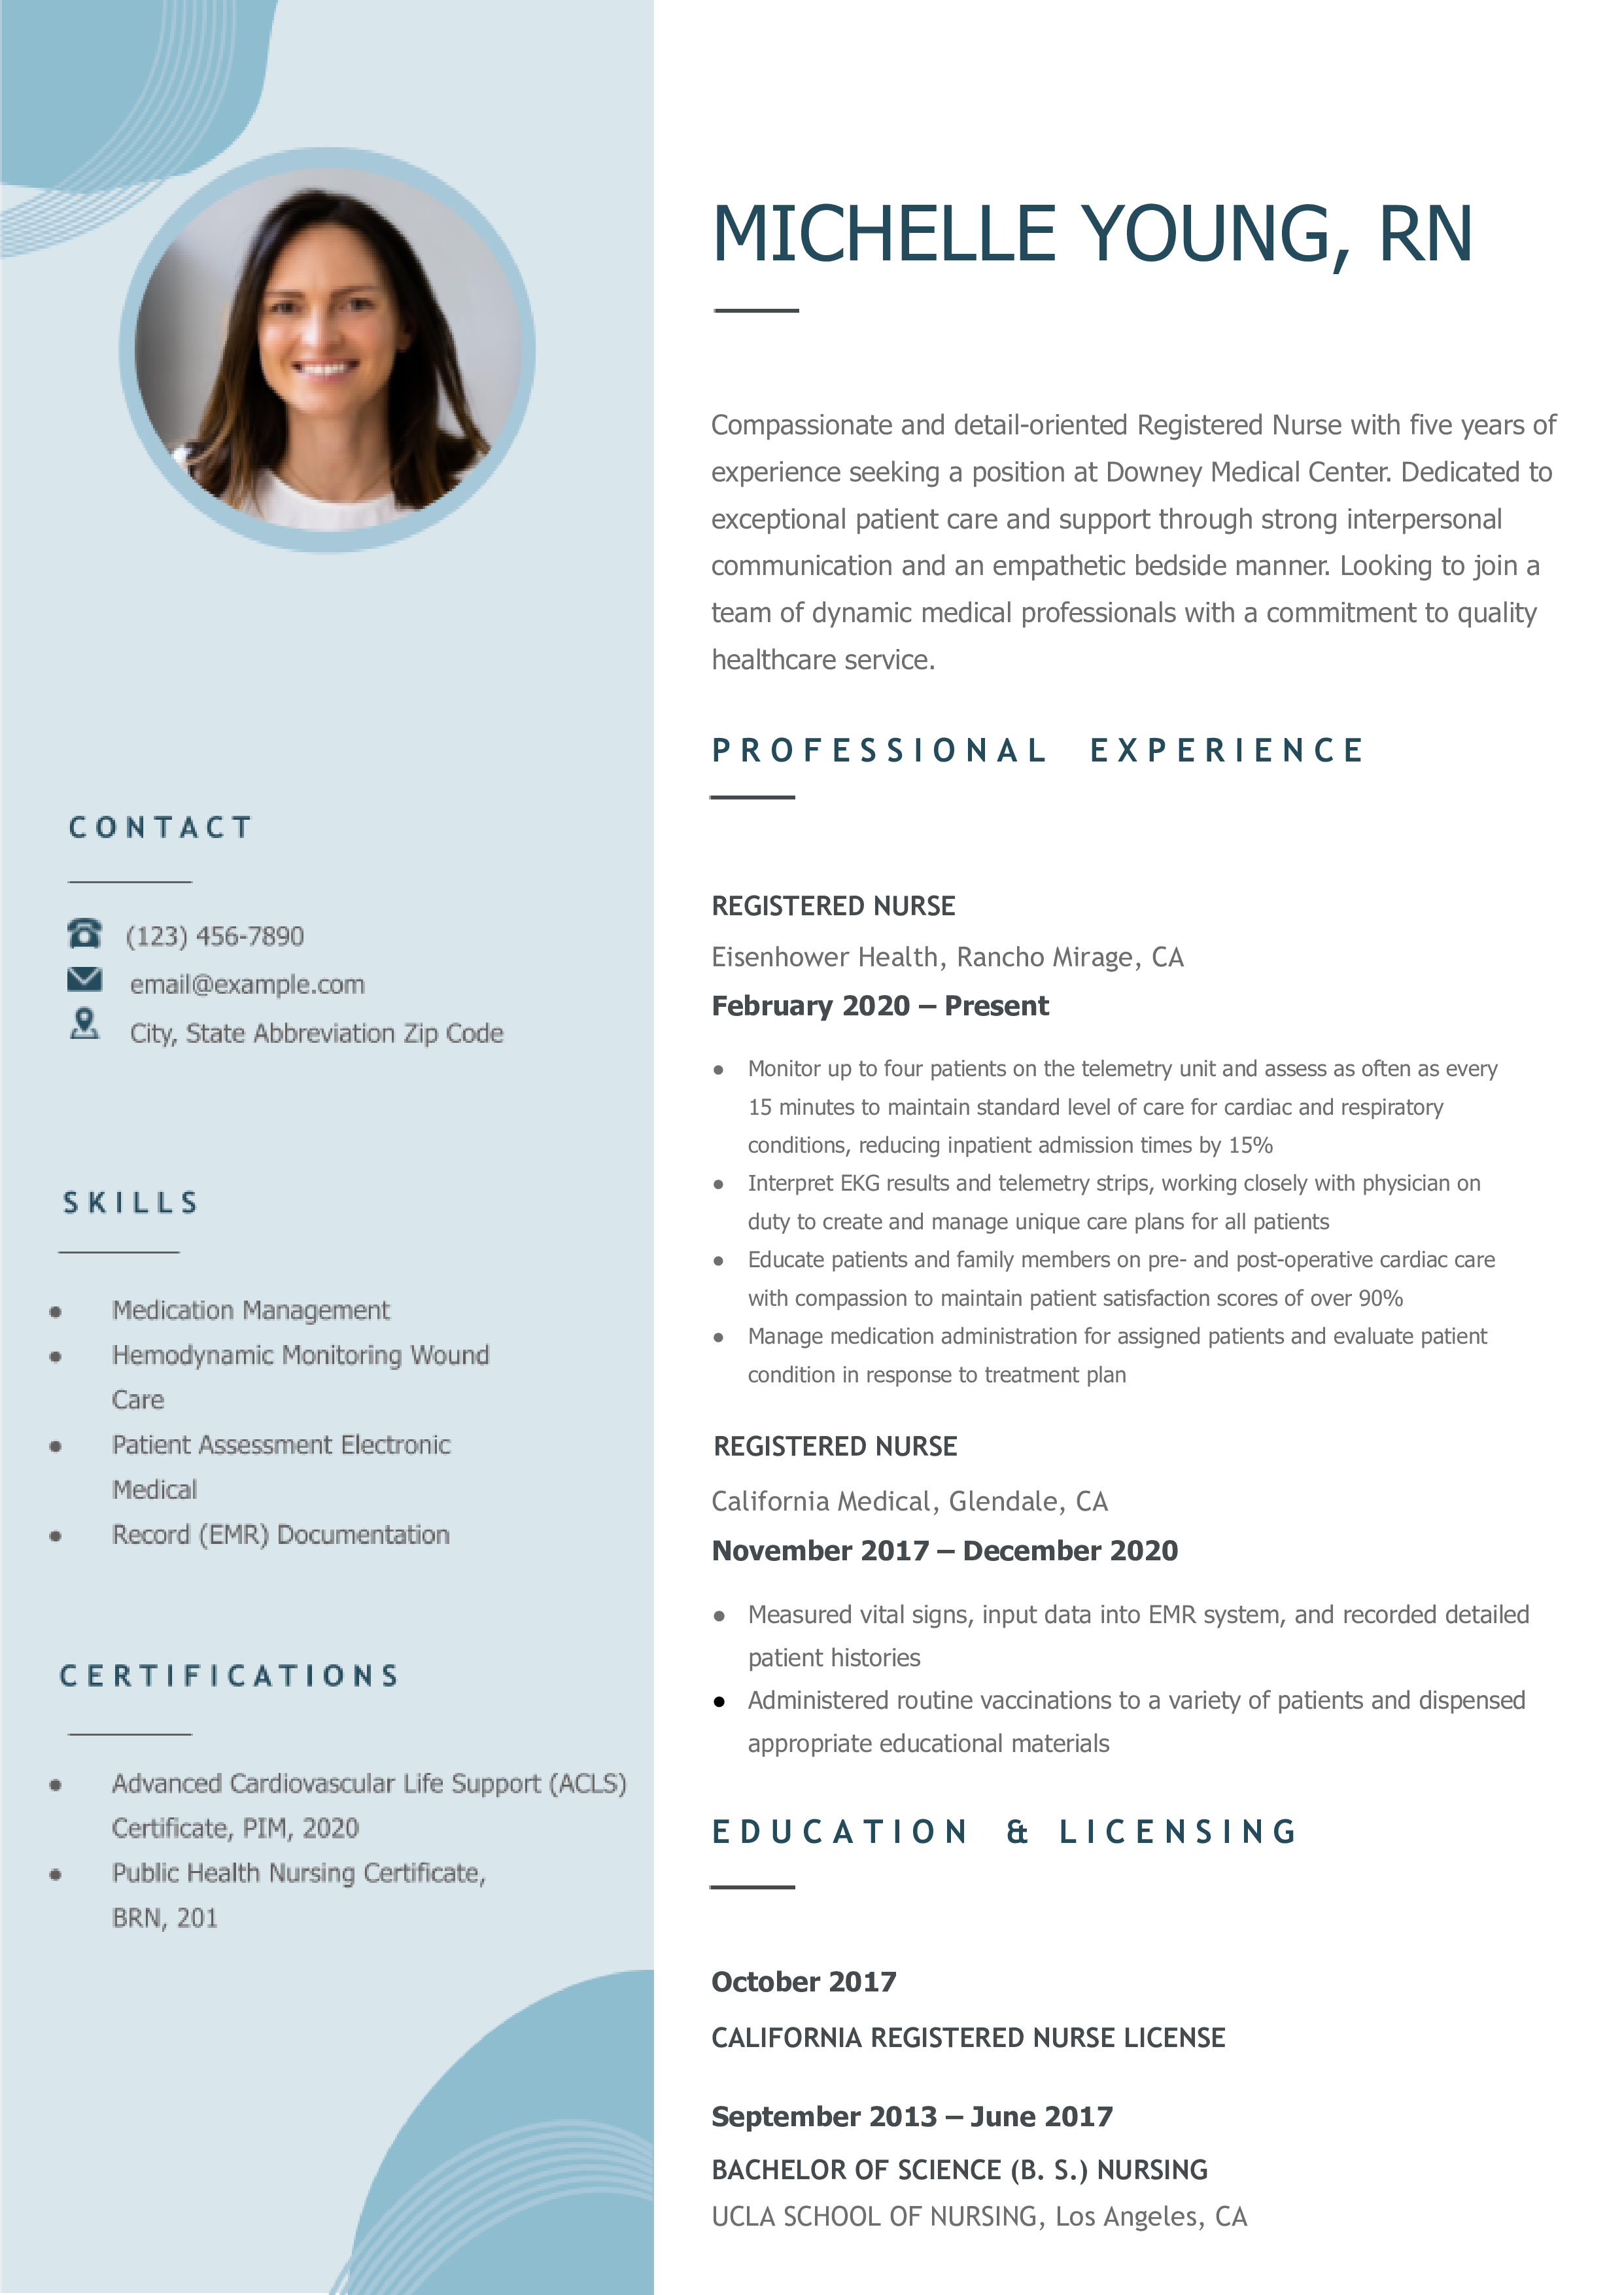 Registered Nurse Resume Templates and Examples.docx